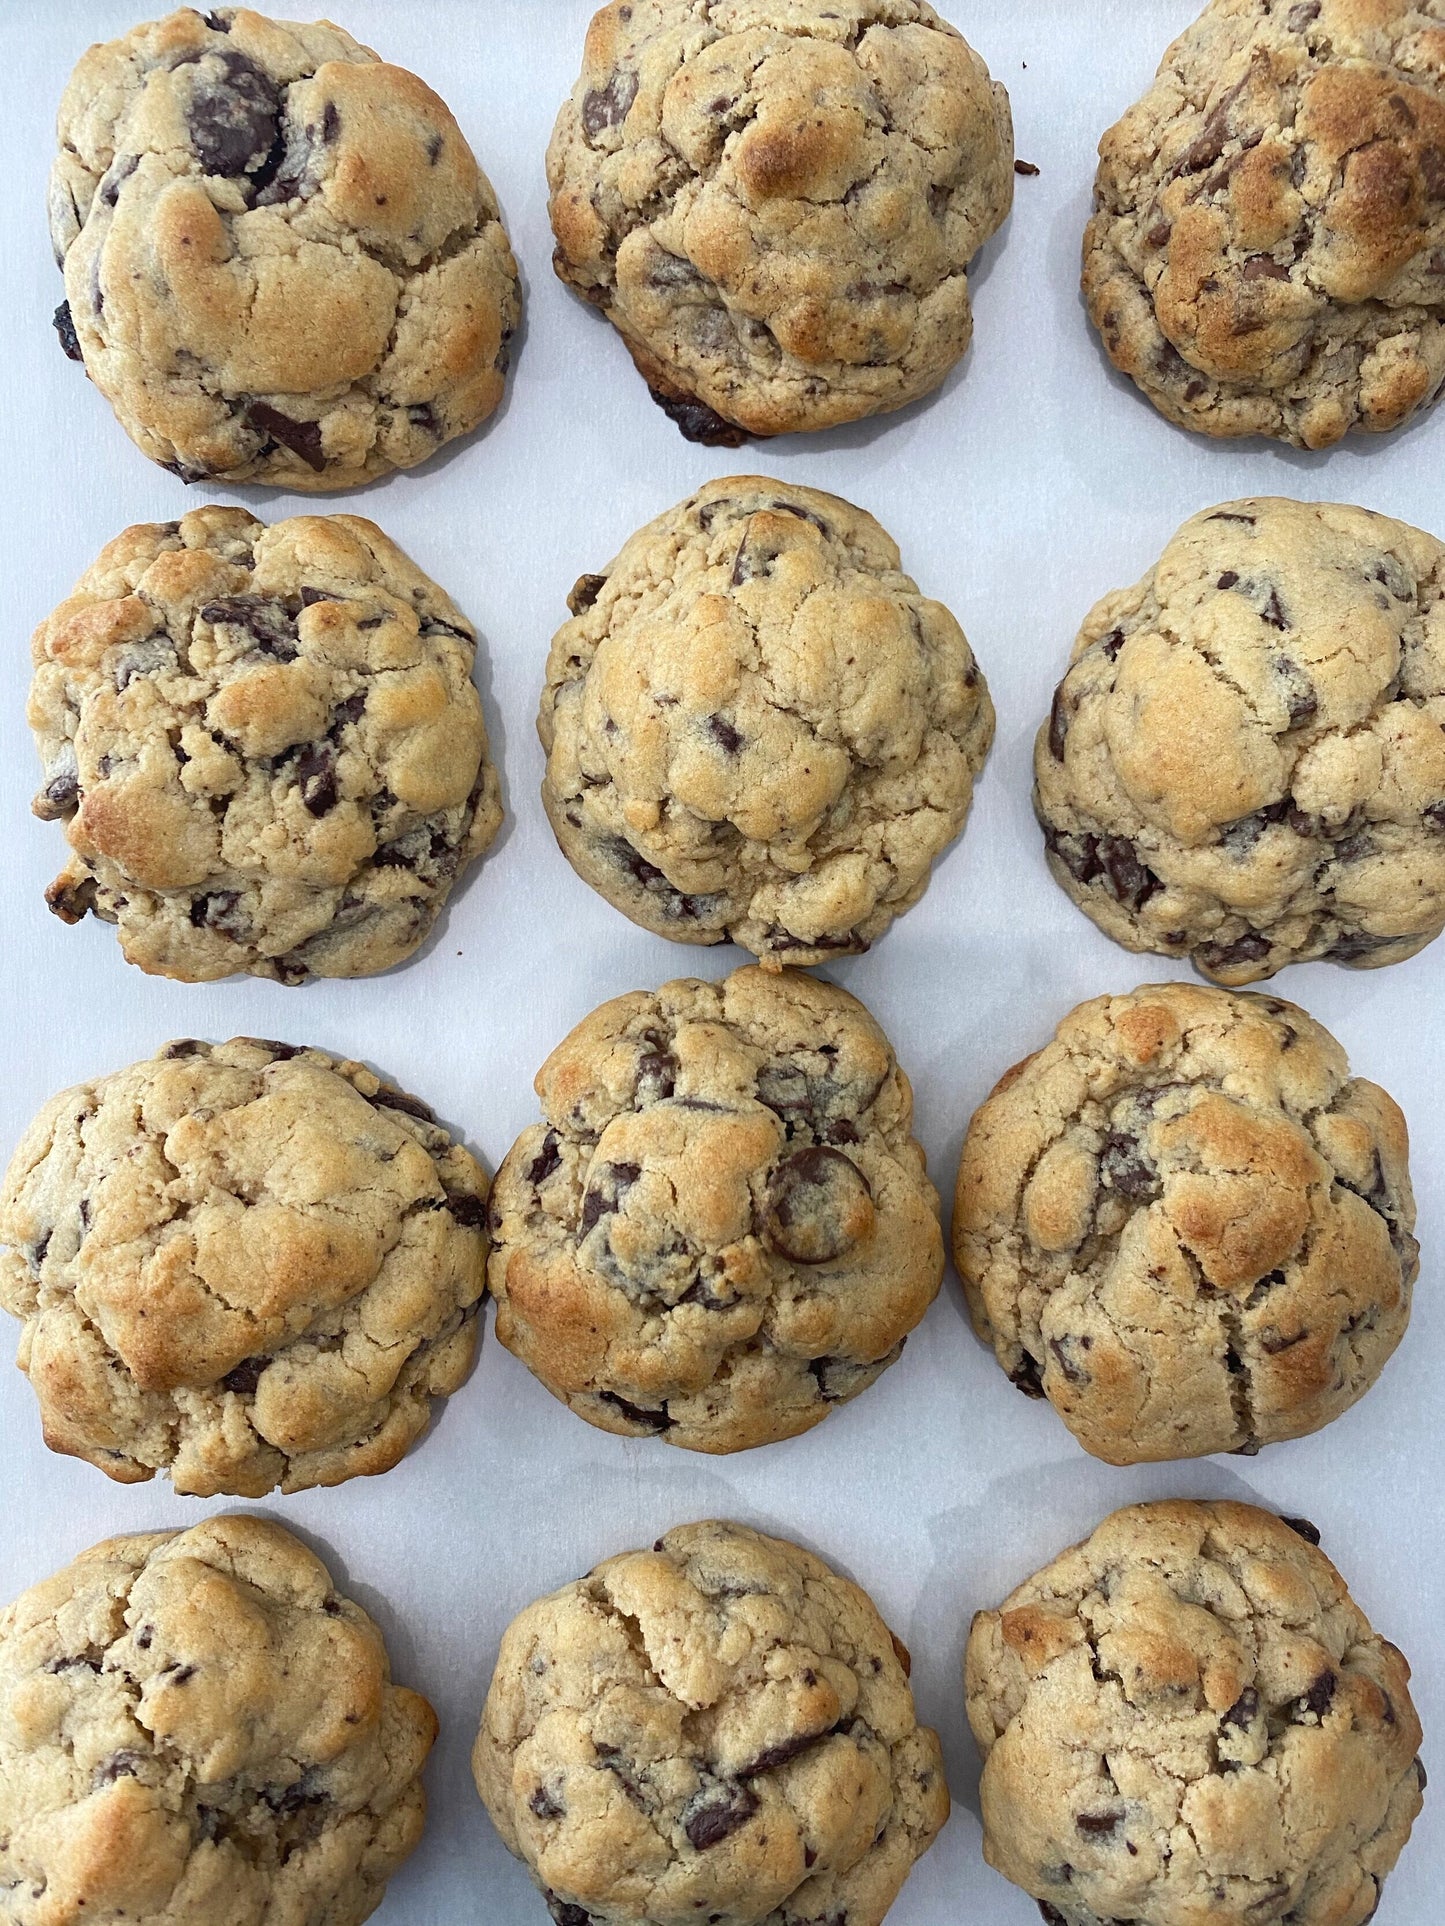 "NOT YOUR AVERAGE" CHOCOLATE CHIP COOKIES